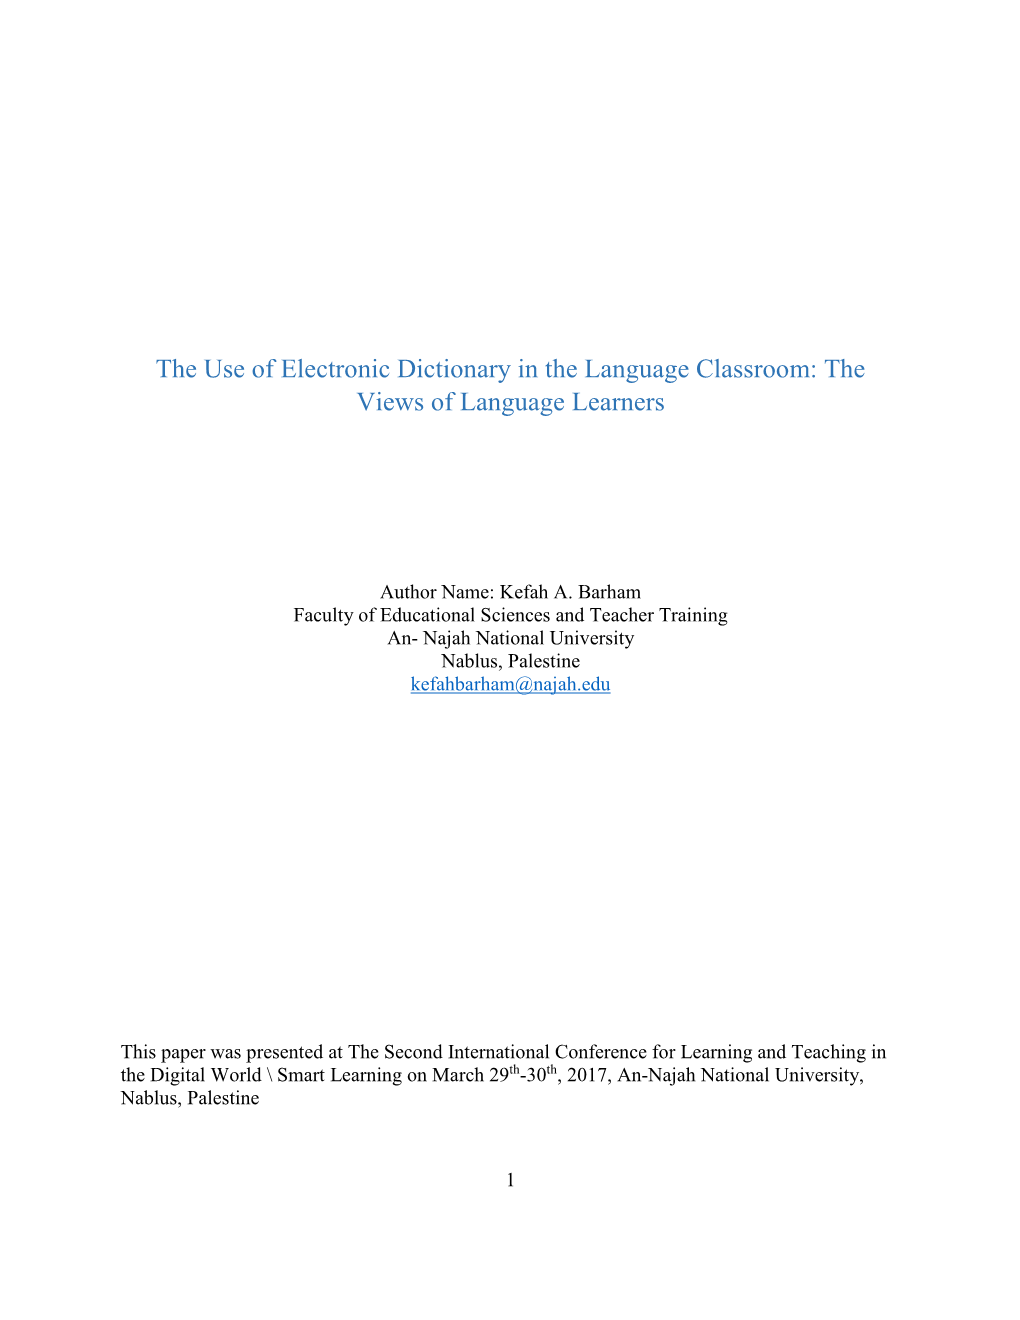 The Use of Electronic Dictionary in the Language Classroom: the Views of Language Learners